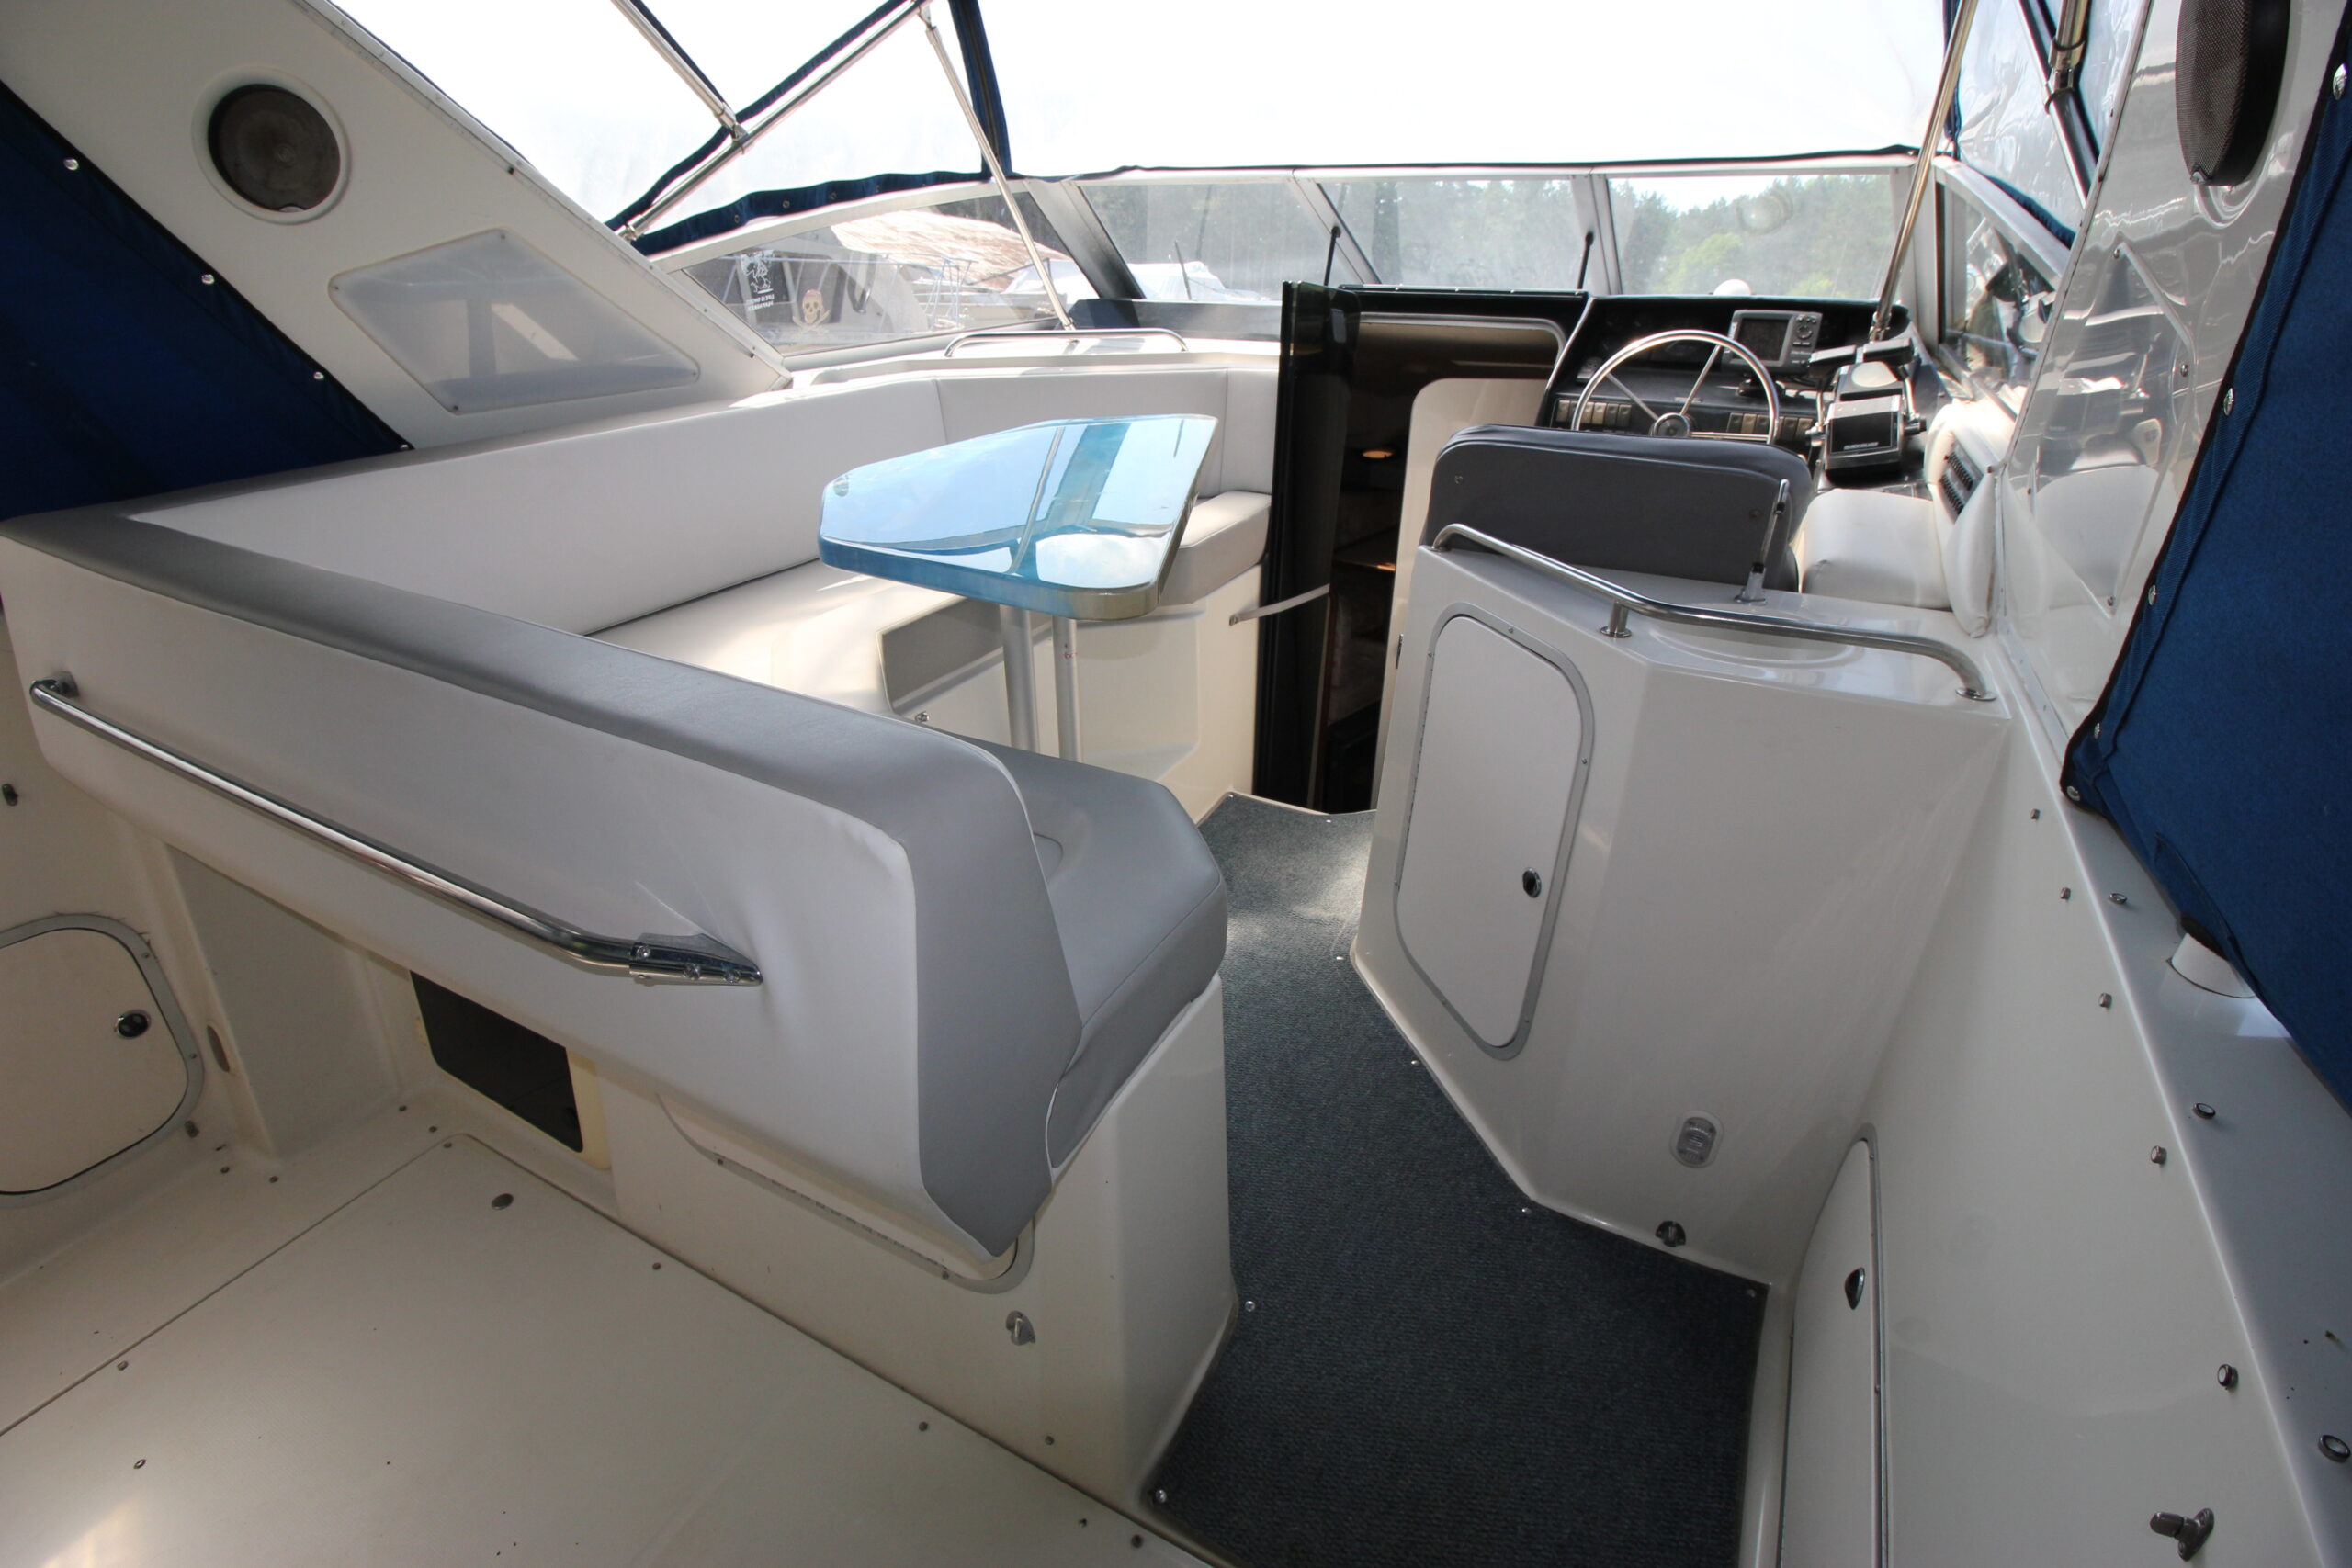 1994 Bayliner 3055 Ciera Sunbridge - Anchors Aweigh Boat Sales - Used Boats For Sale In Minnesota (7)